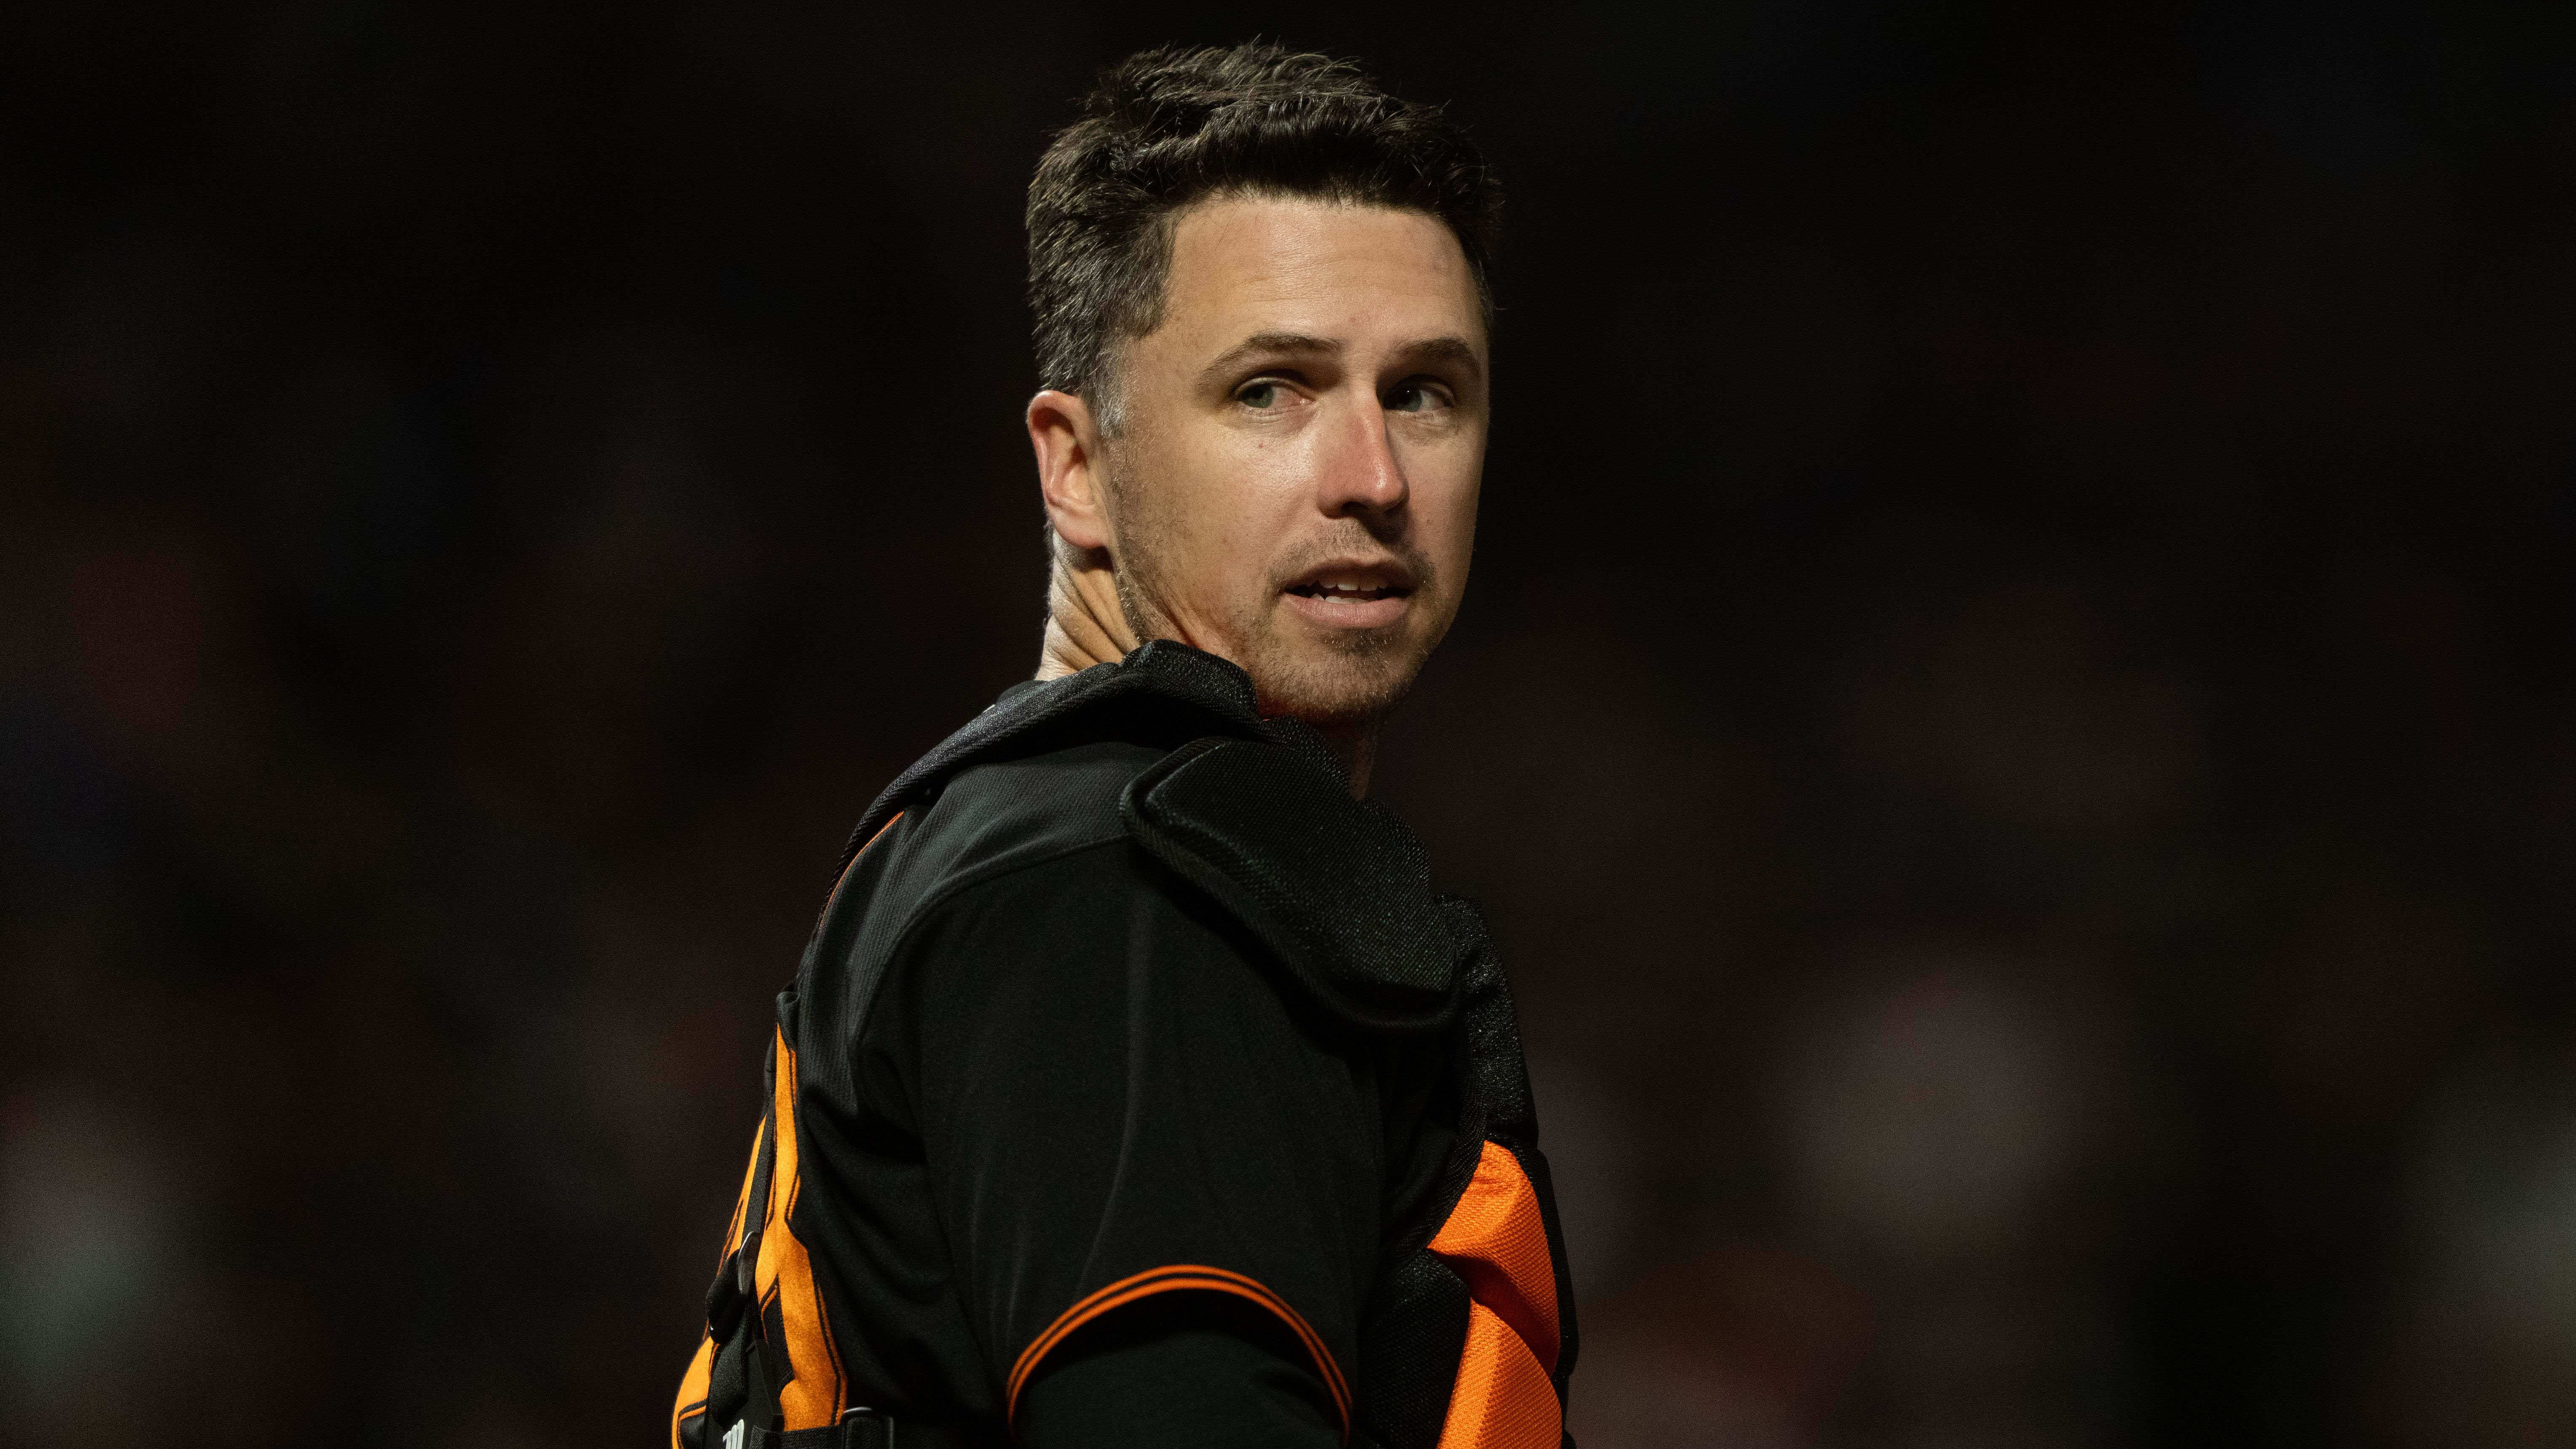 San Francisco Giants Legend ‘Excited About This Team’ Despite Slow Start